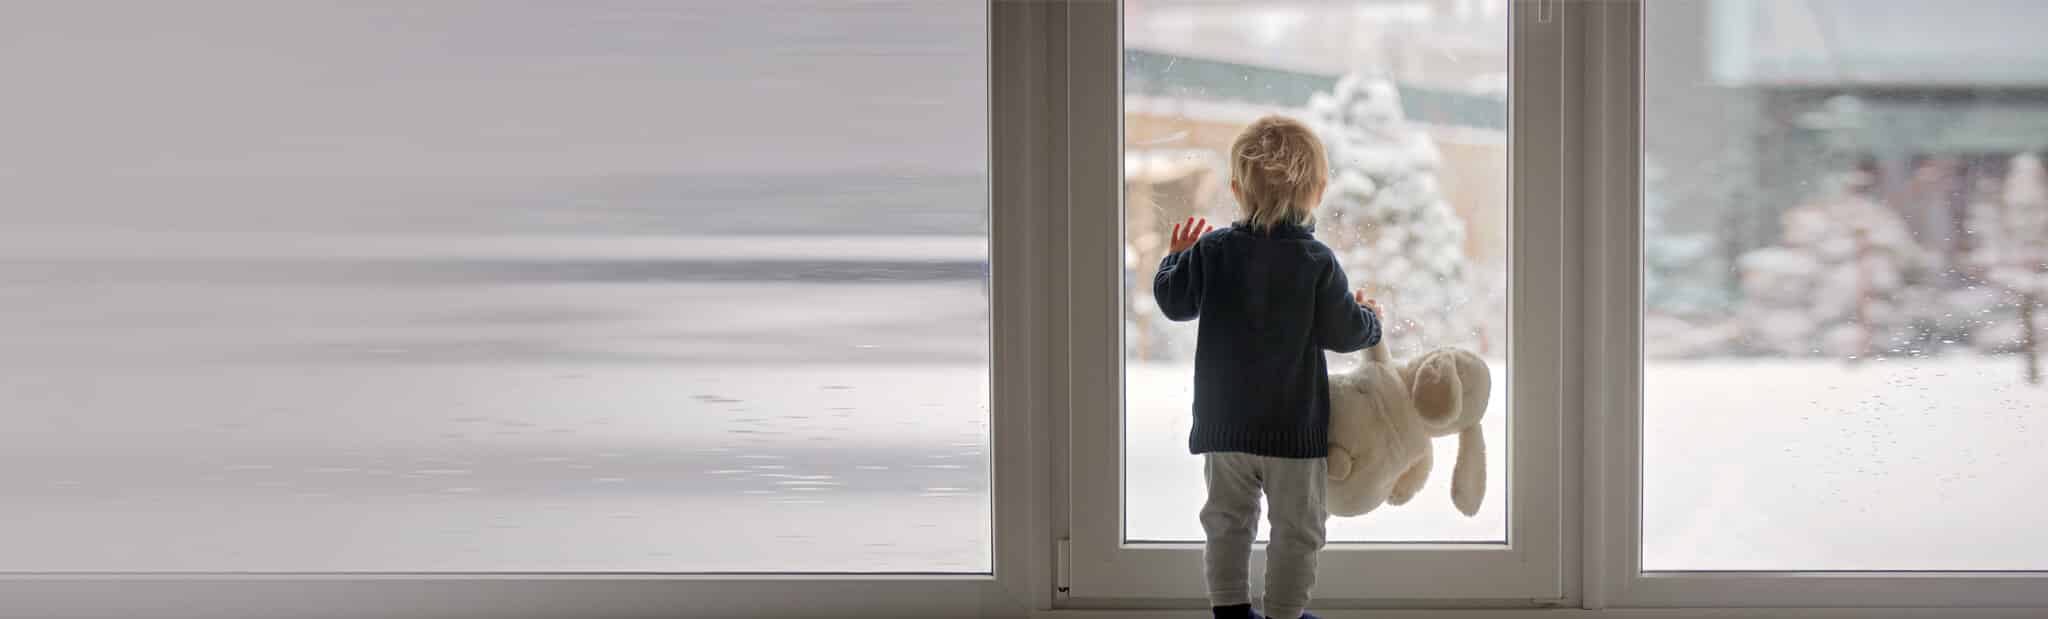 Child holding a stuffed animal looking out the glass windows at the snow